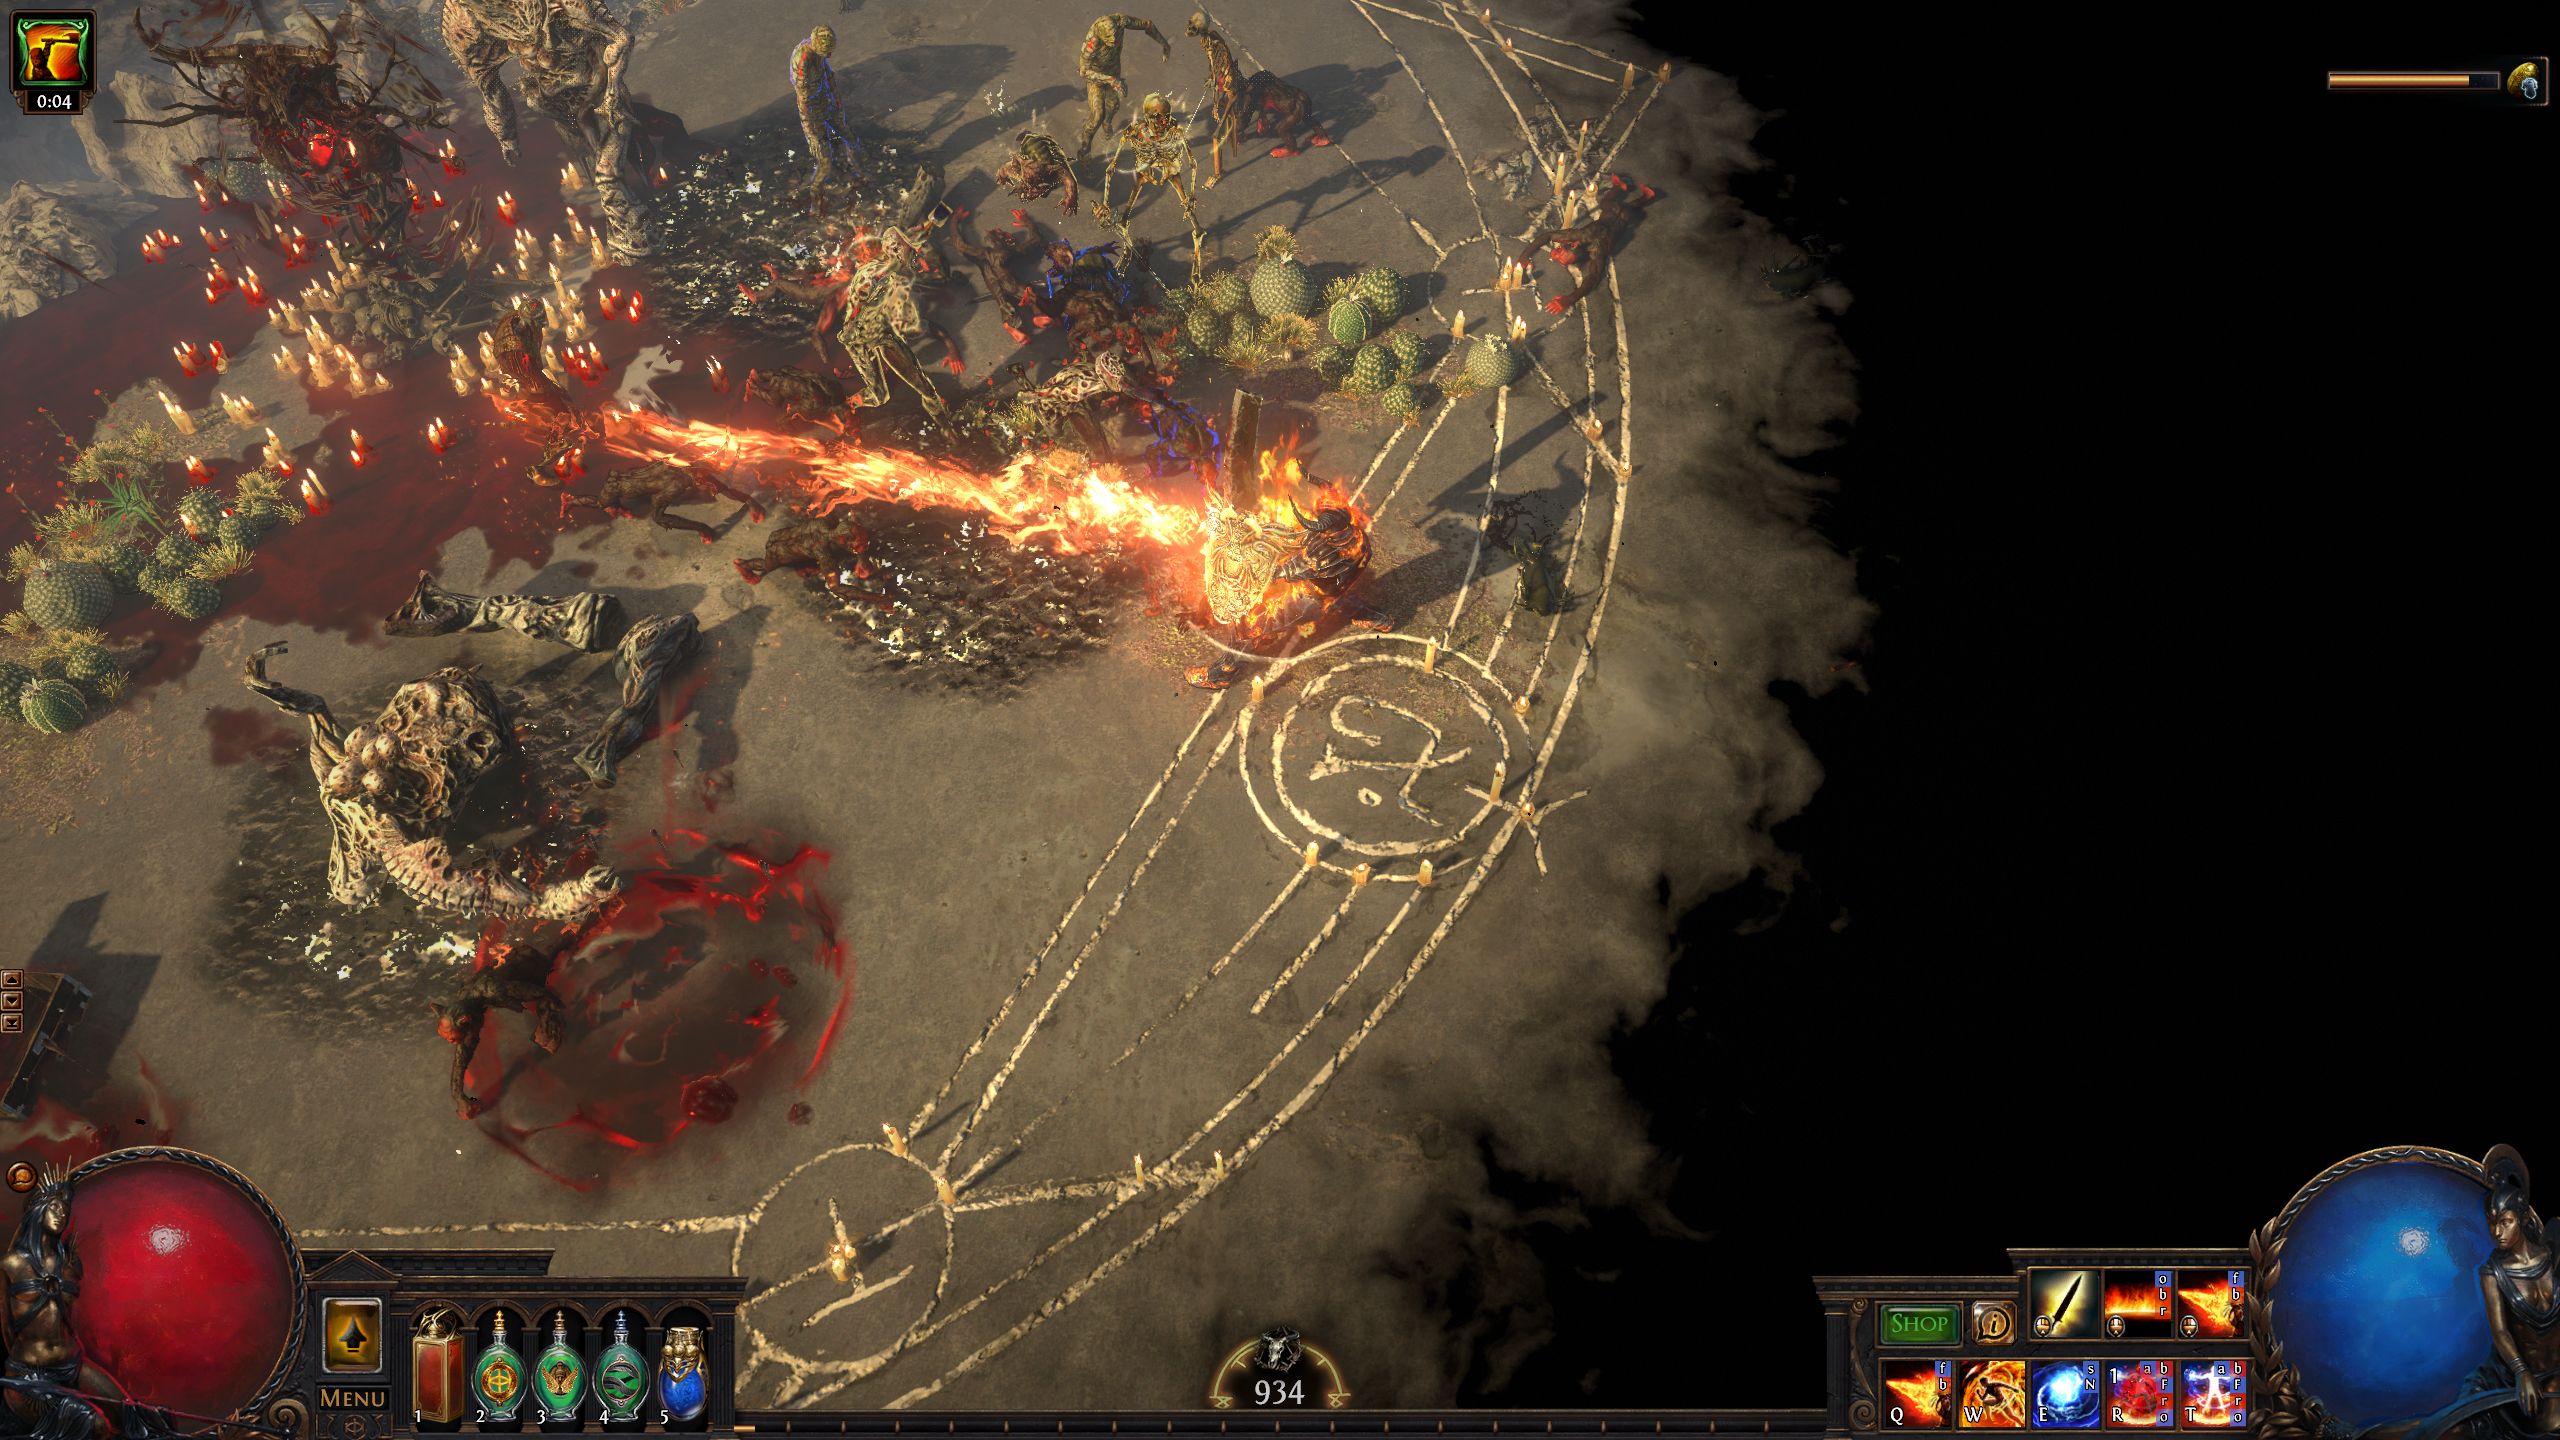 Path of Exile: Echoes of the Atlas